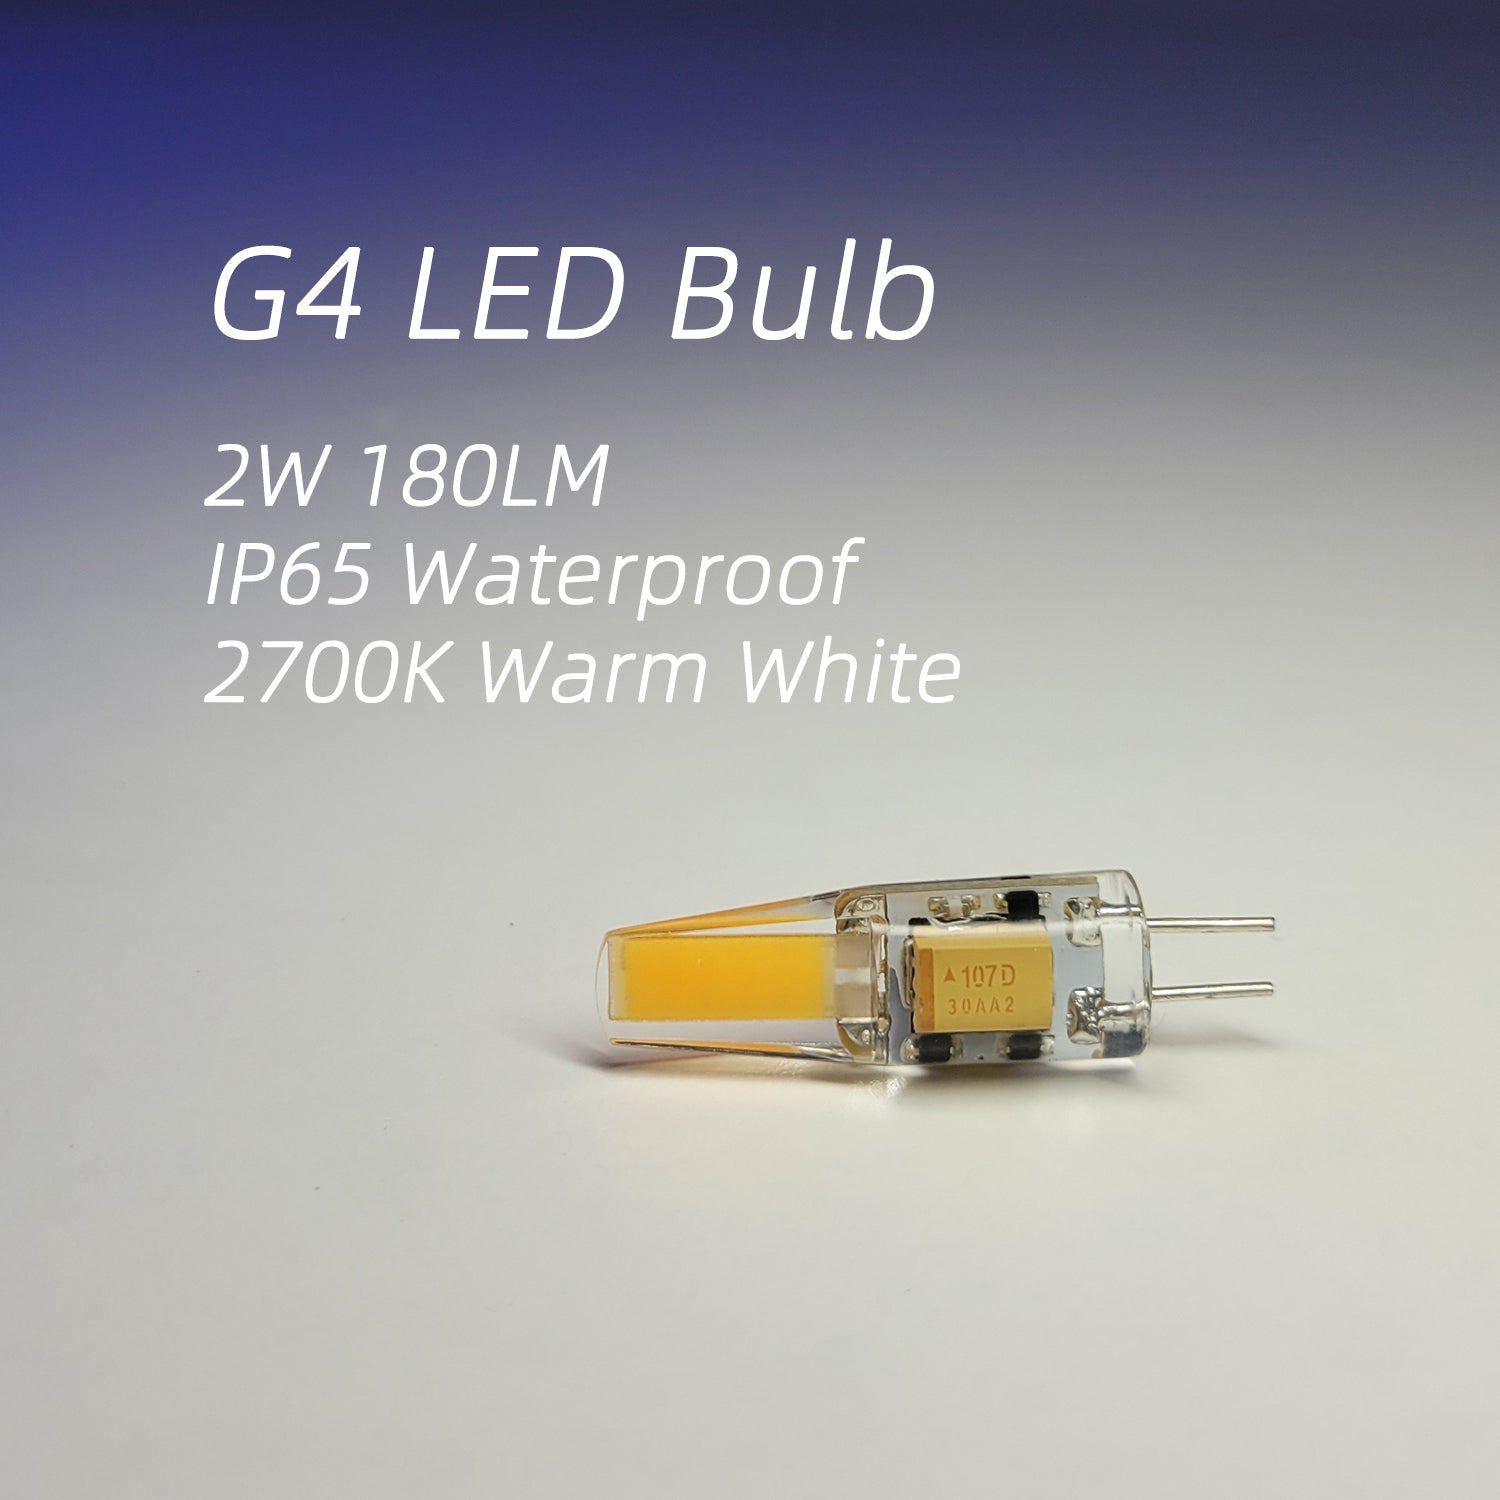 G4 LED bulb with specifications 2W 180 lumens, IP65 waterproof, 2700K warm white light on a gradient background